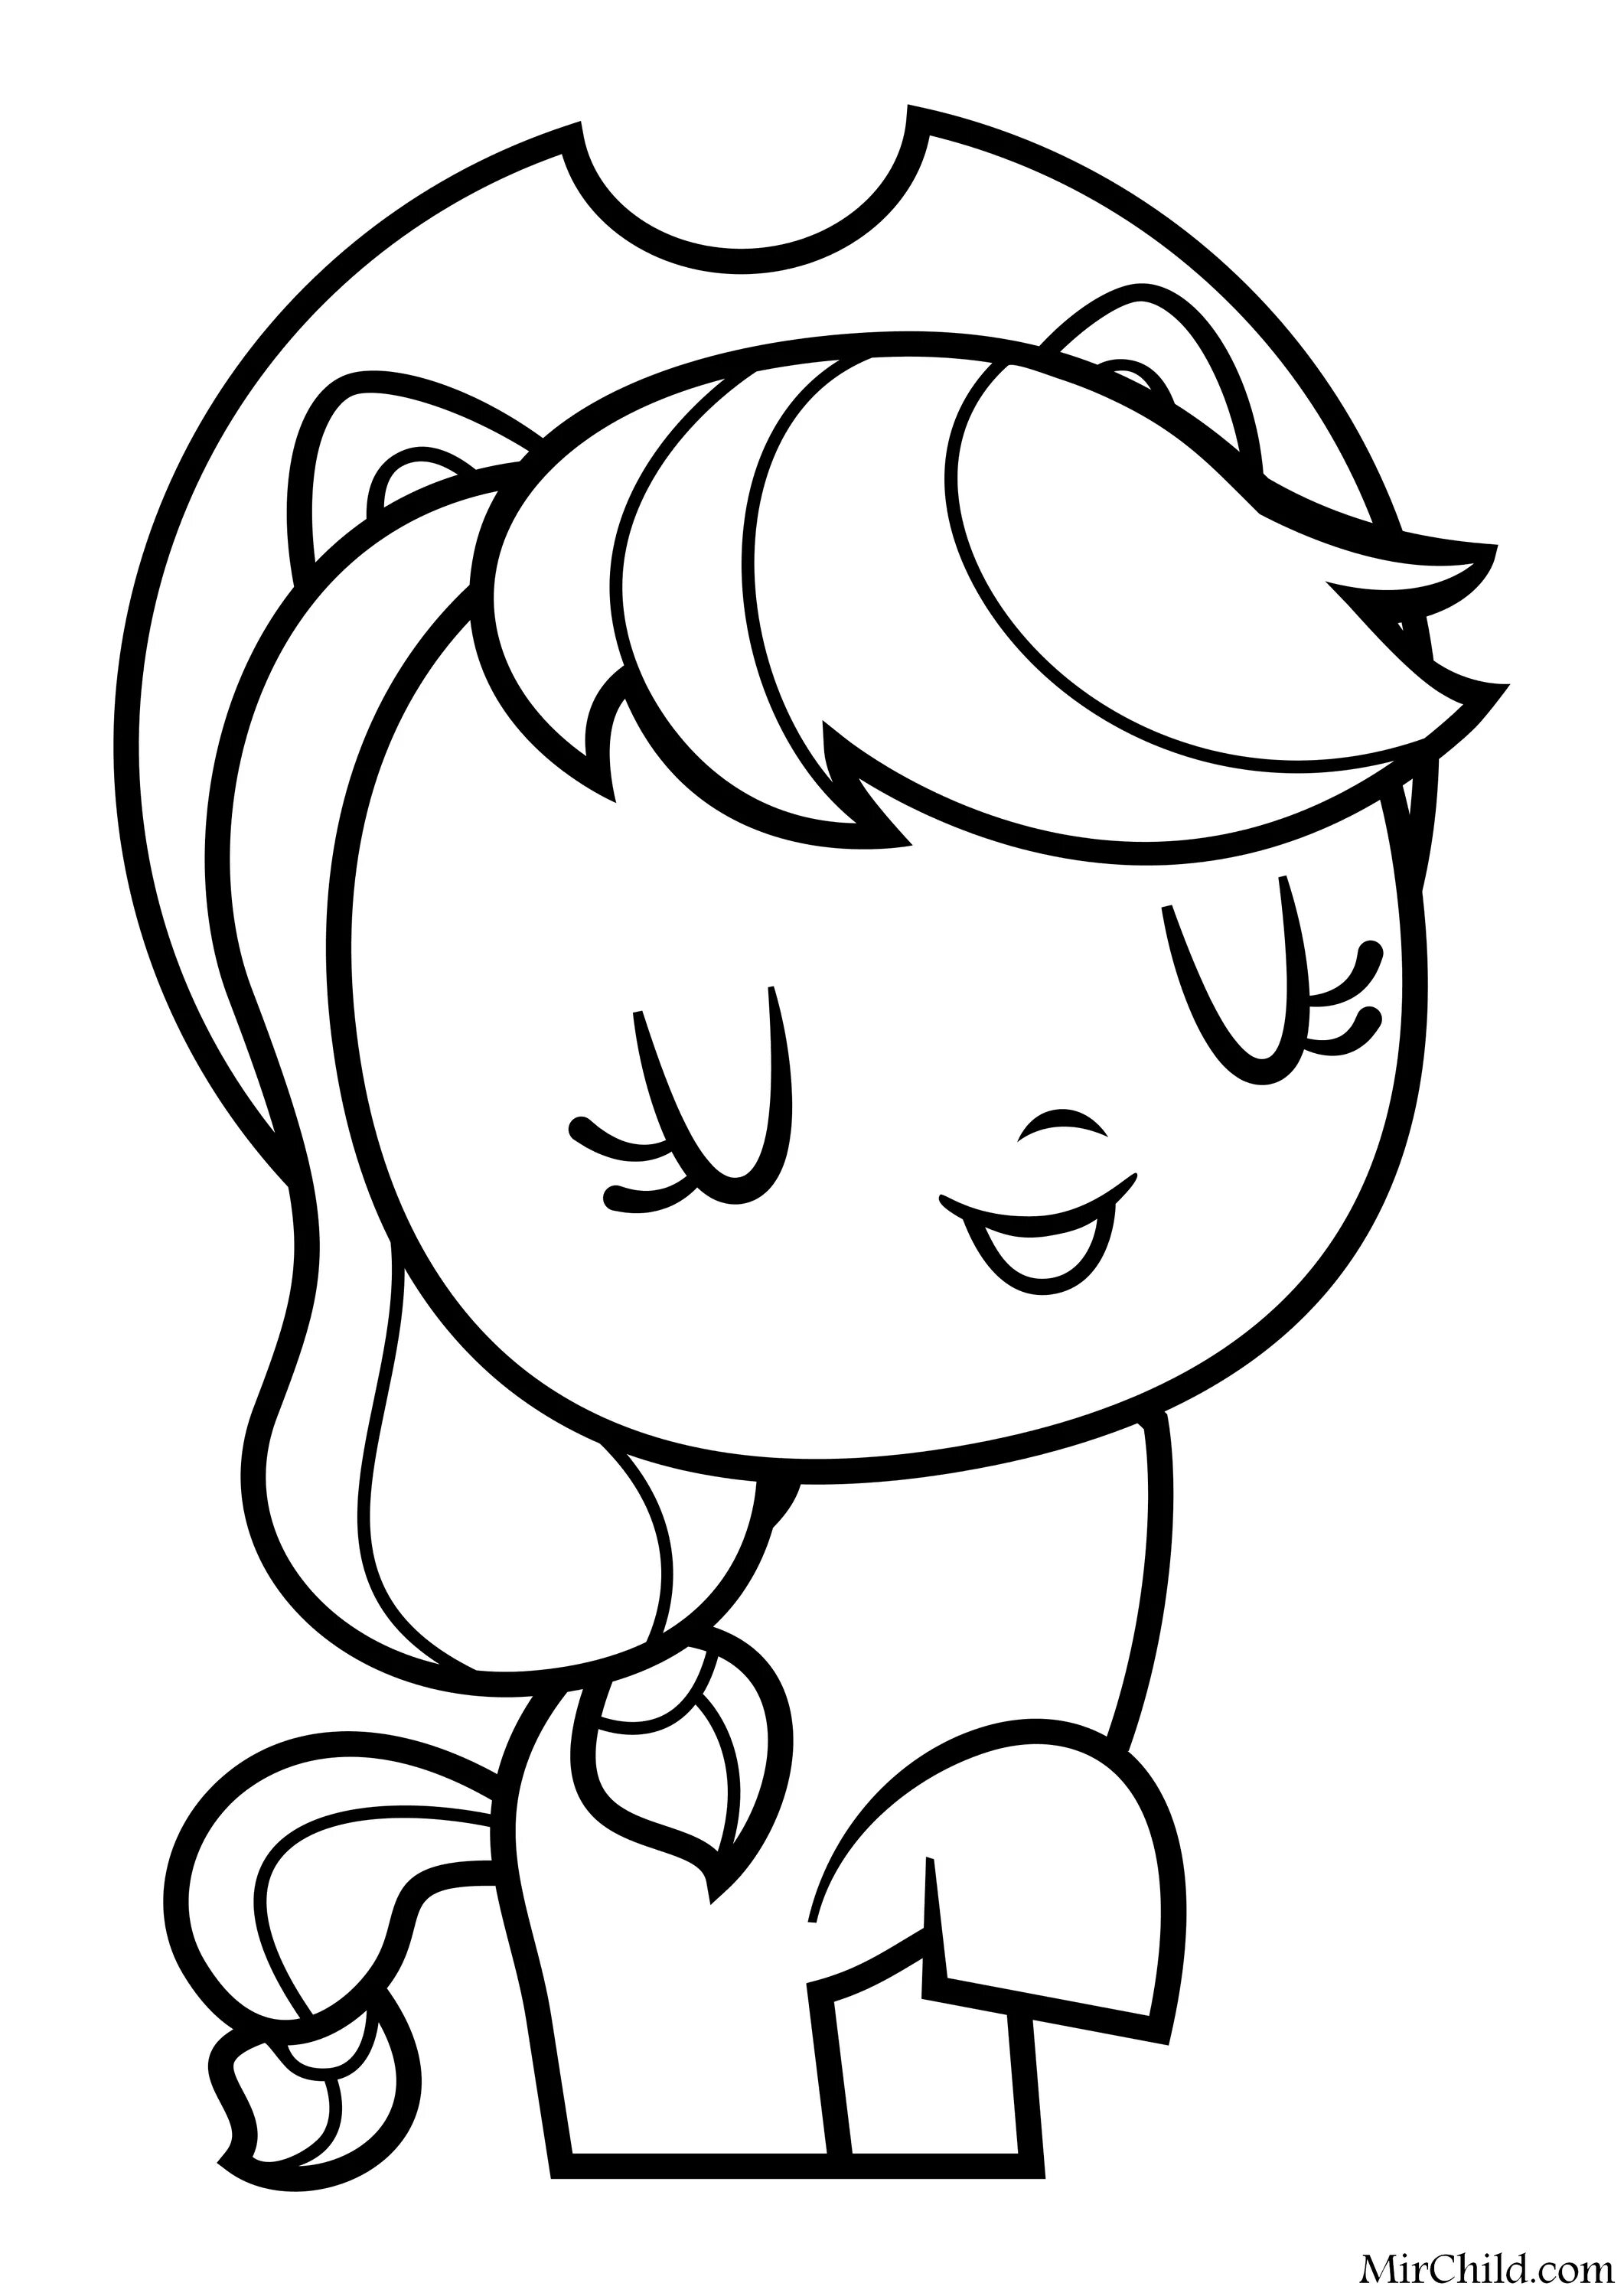 Coloring page for exciting pony cuties